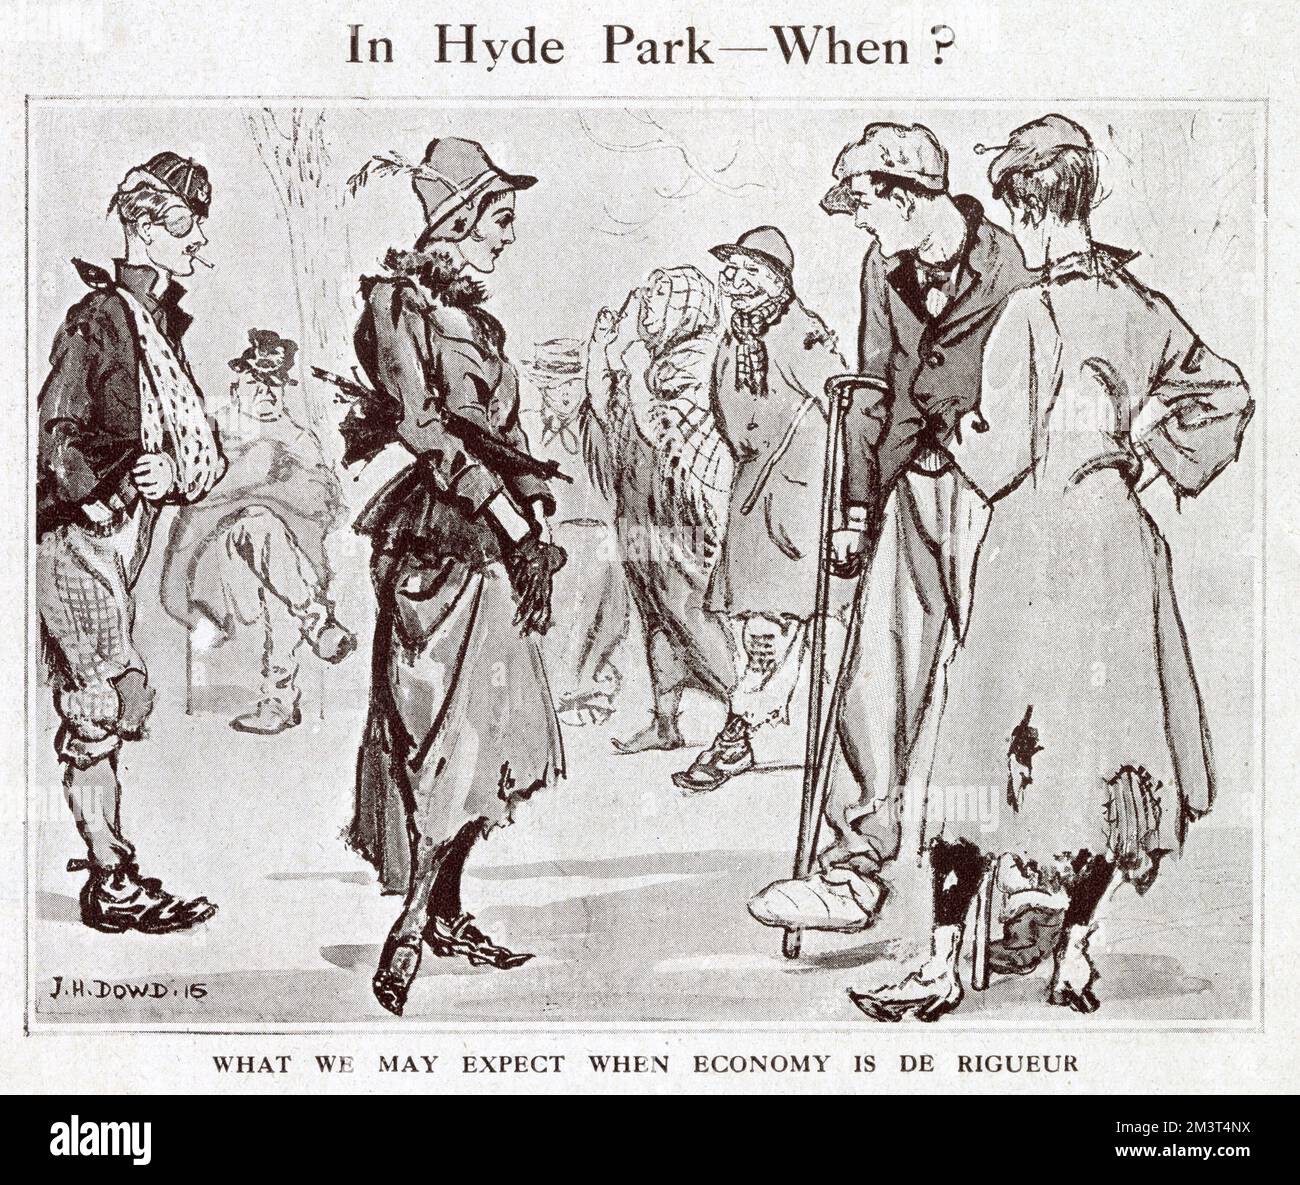 In Hyde Park - When? What we may expect when war economy is de rigeur. Formerly smart society types in London's Hyde Park, promenading in ragged clothes. Humorous comment on the government's recommendations about war economy, in particular with refer to extravagant dress.     Date: 1916 Stock Photo